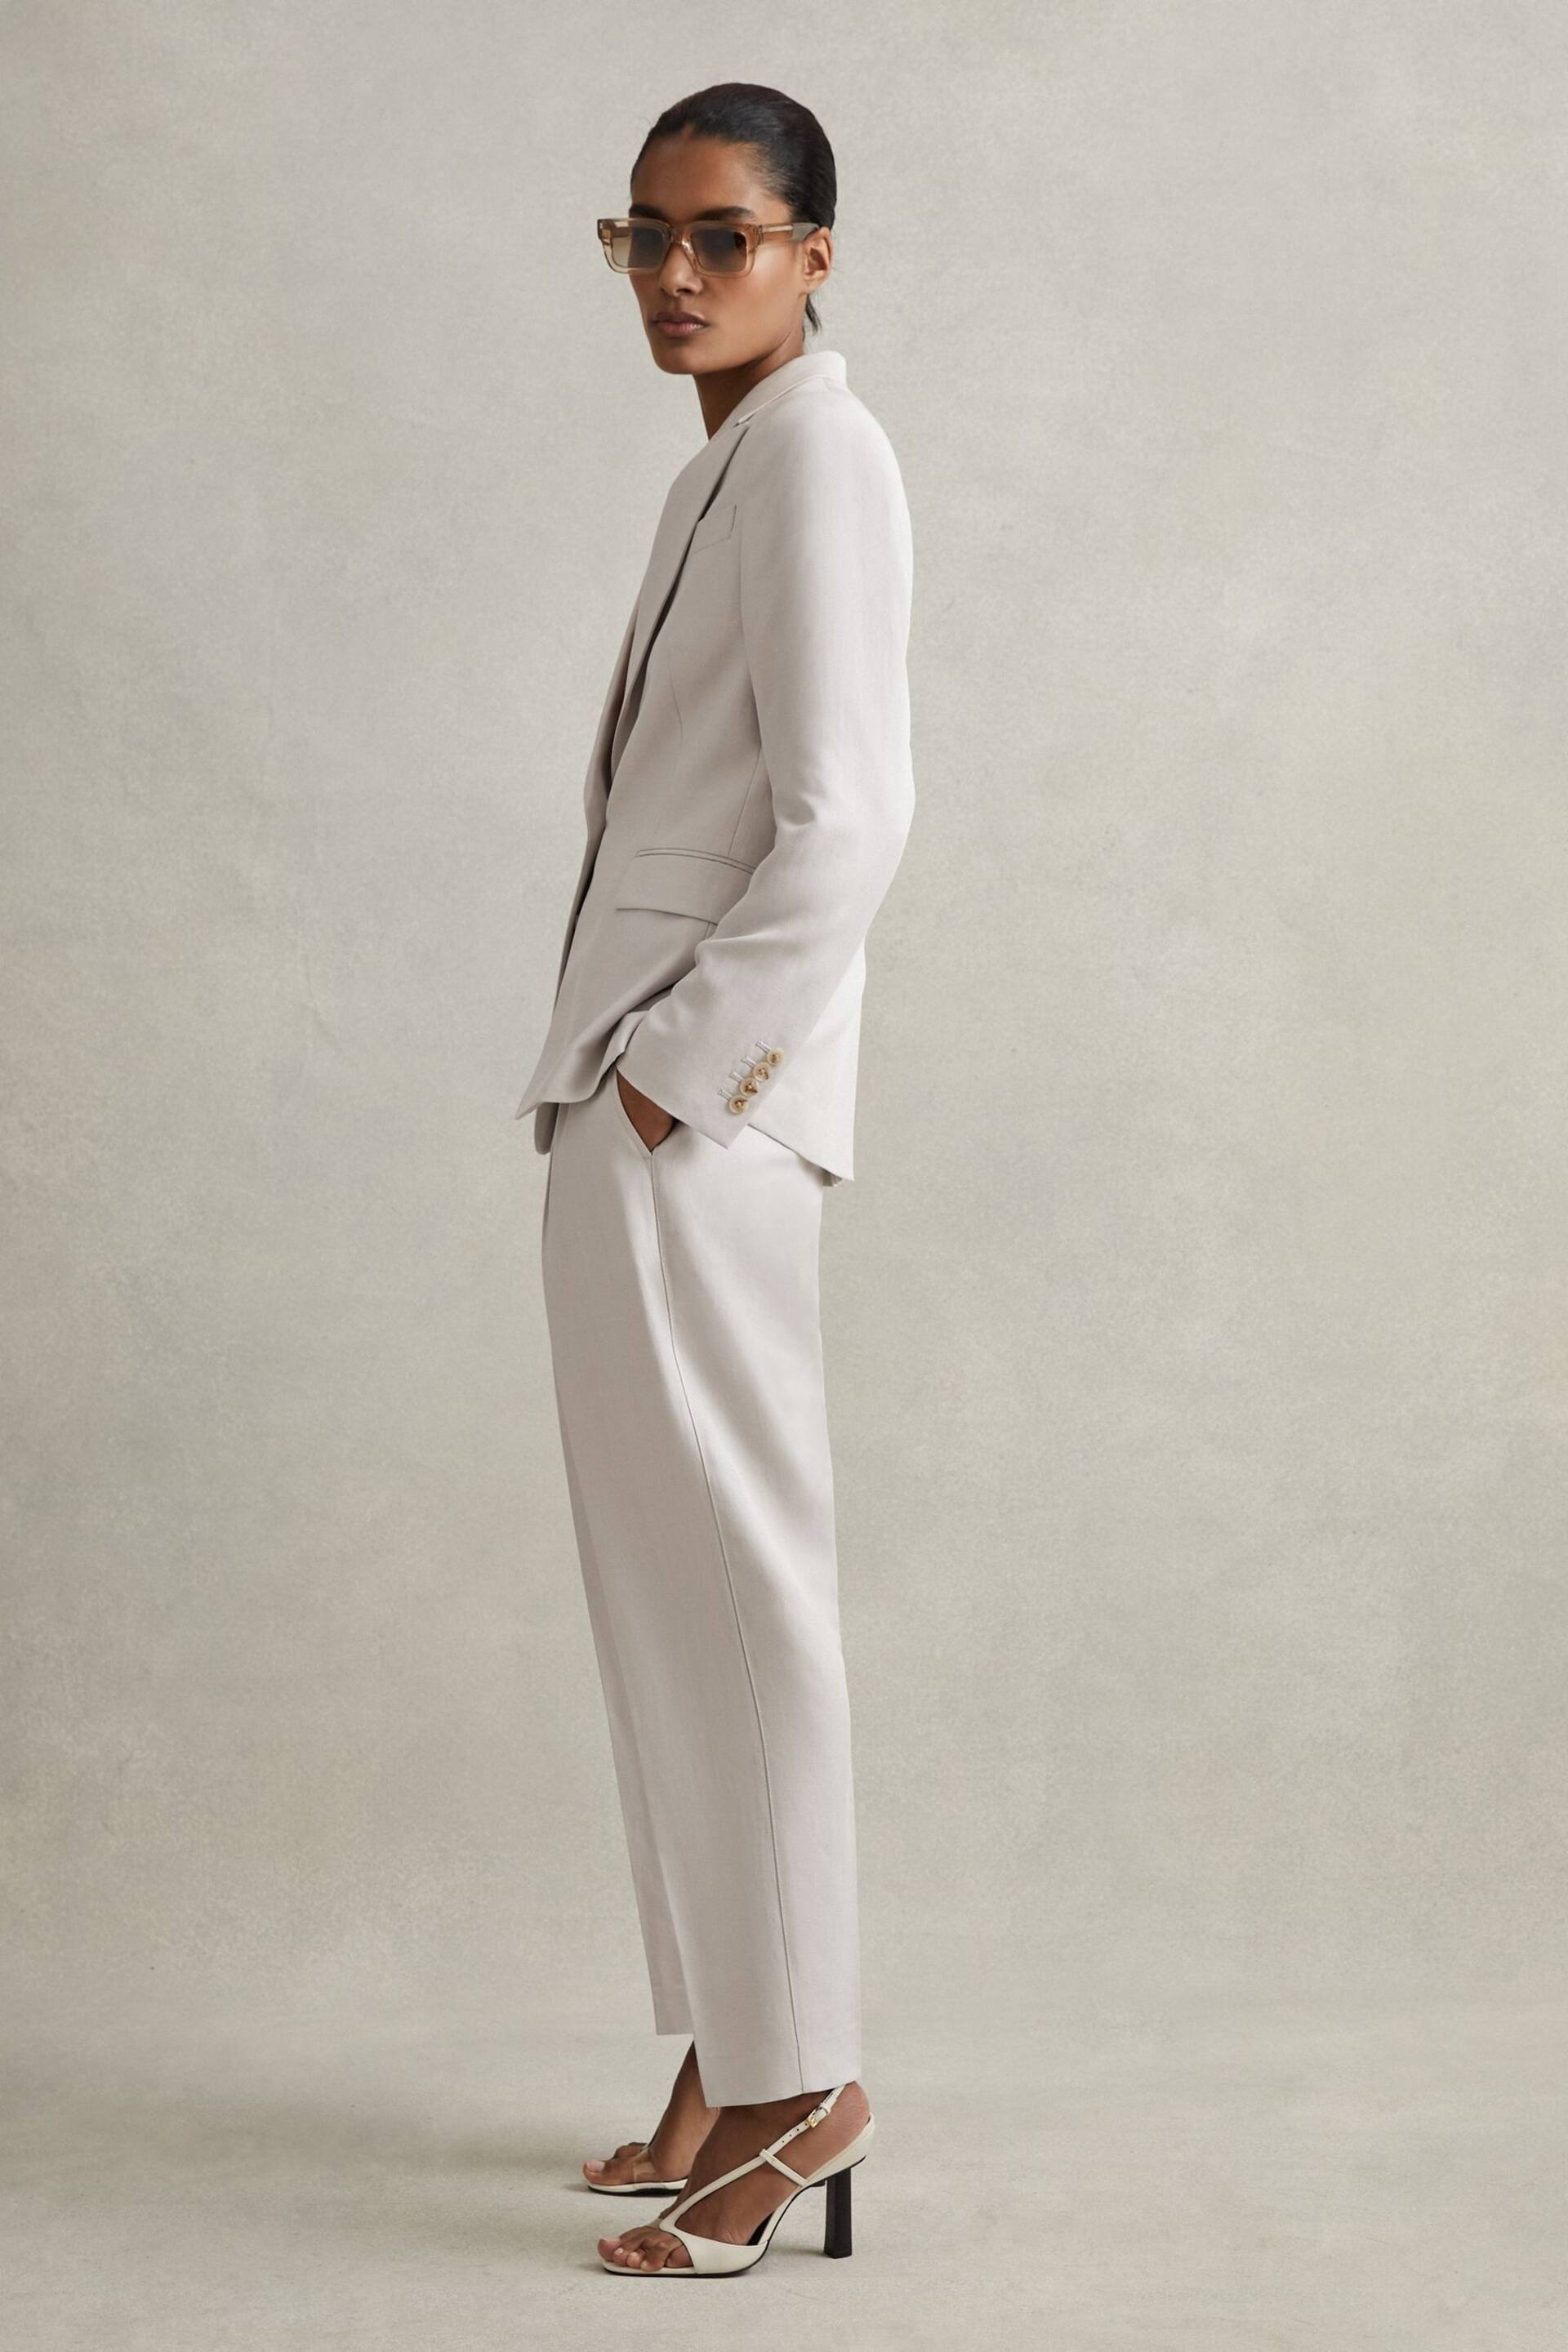 Reiss Light Grey Farrah Petite Tapered Suit Trousers with TENCEL™ Fibers - Image 1 of 7